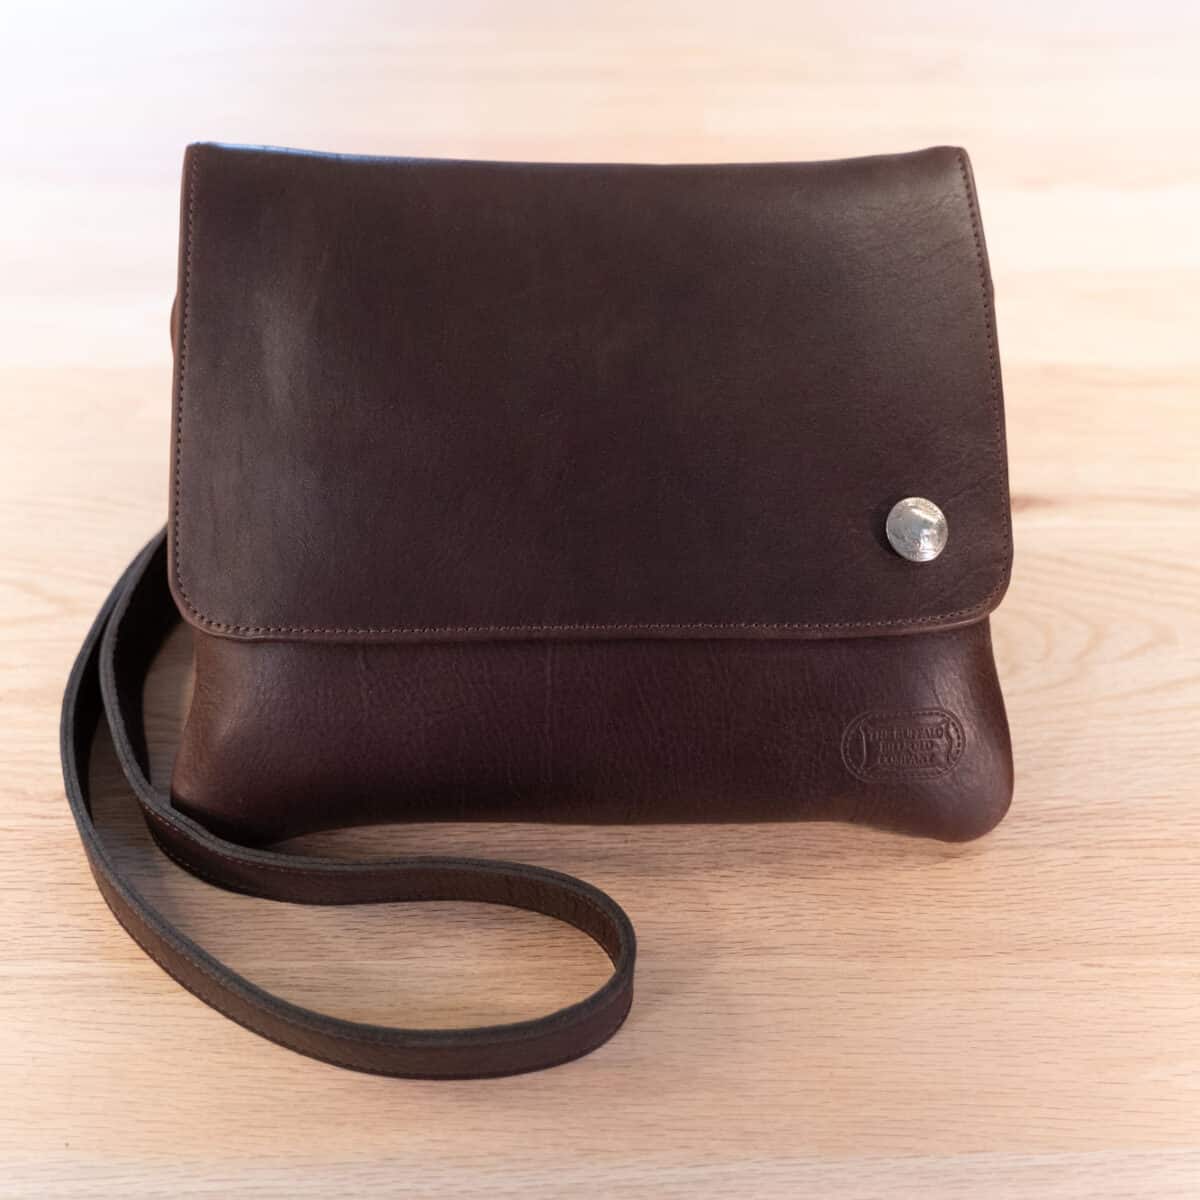 Simplicity Clutch, Wristlet and Purse in Two SIZES-ONE Size